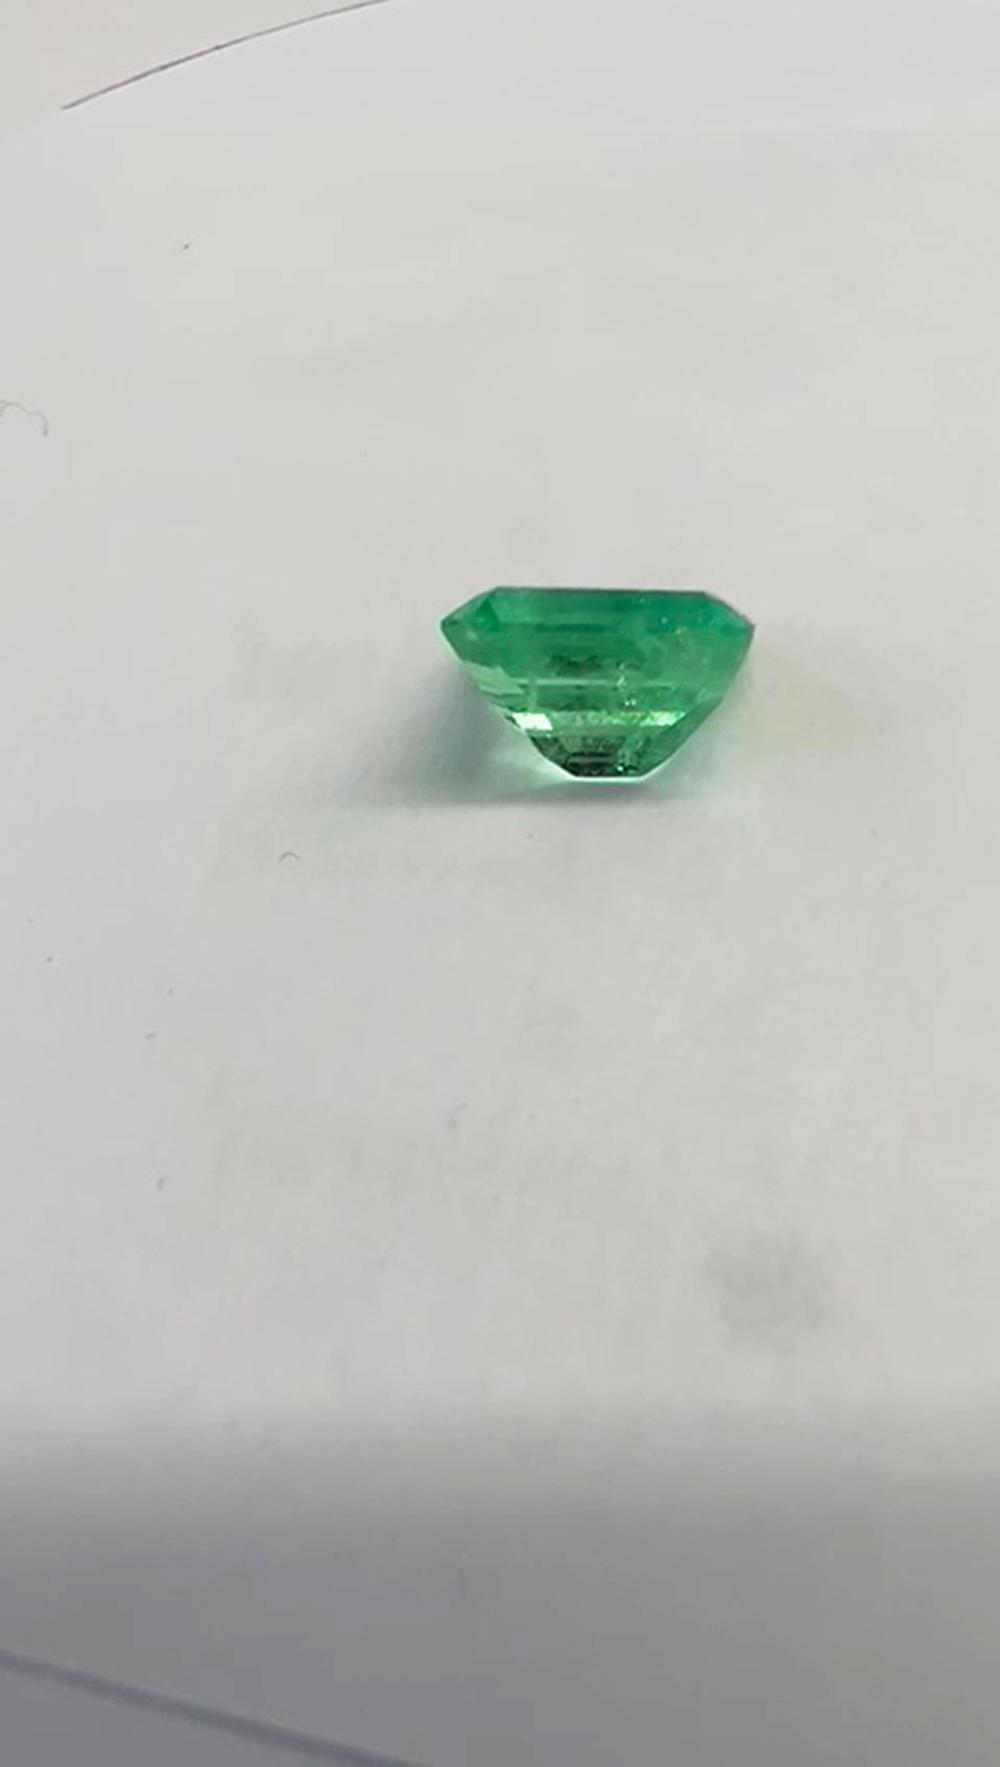 2.94 Ct. Colombian Emerald